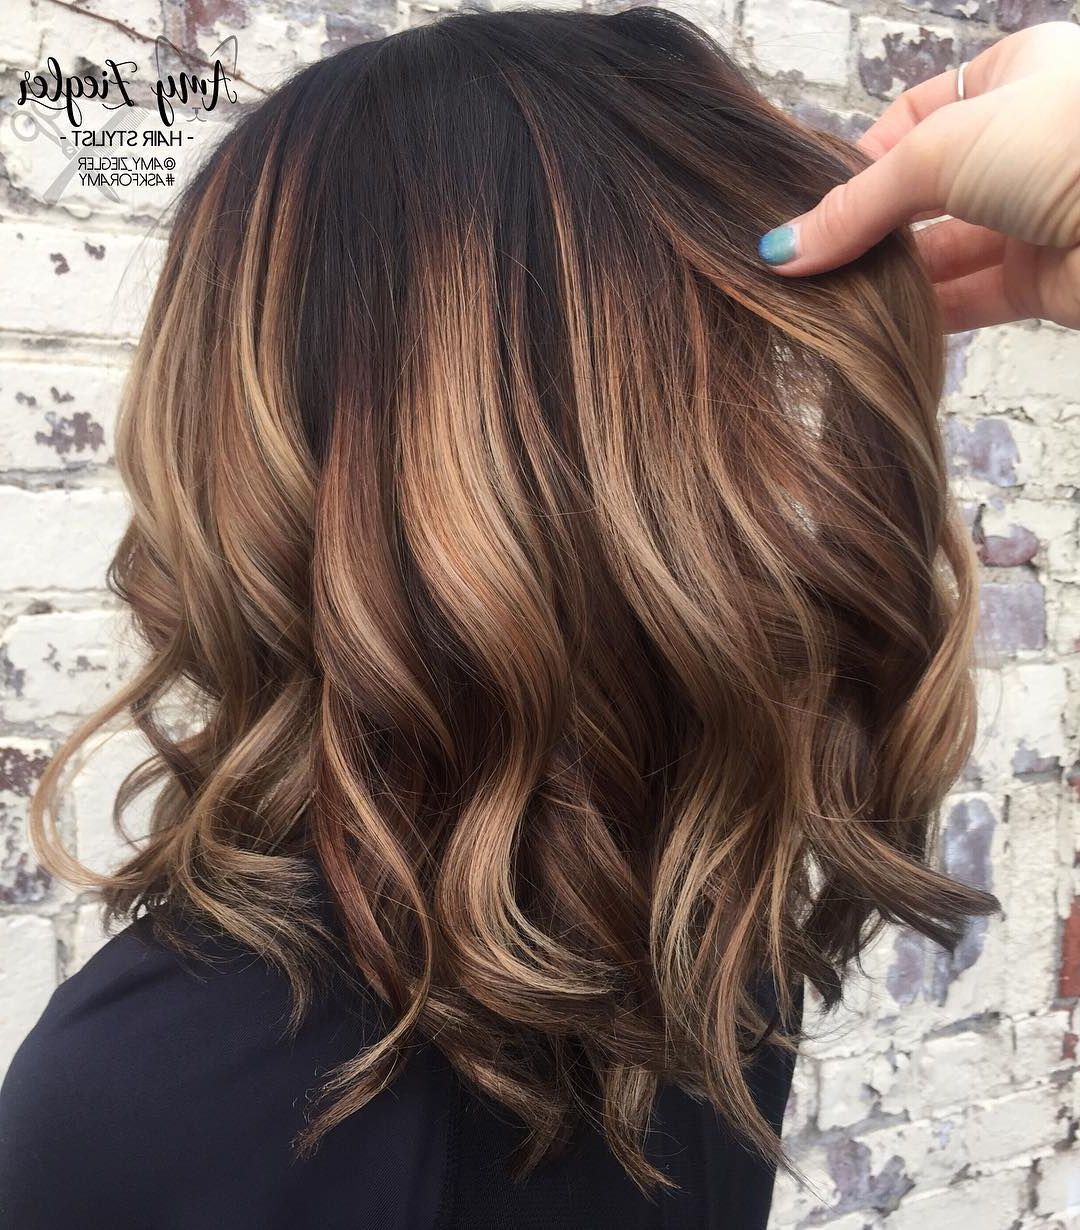 Well Liked Medium Hairstyles With Balayage Inside Best Brown Balayage Hair Designs For Medium Length Hair, Medium (View 18 of 20)